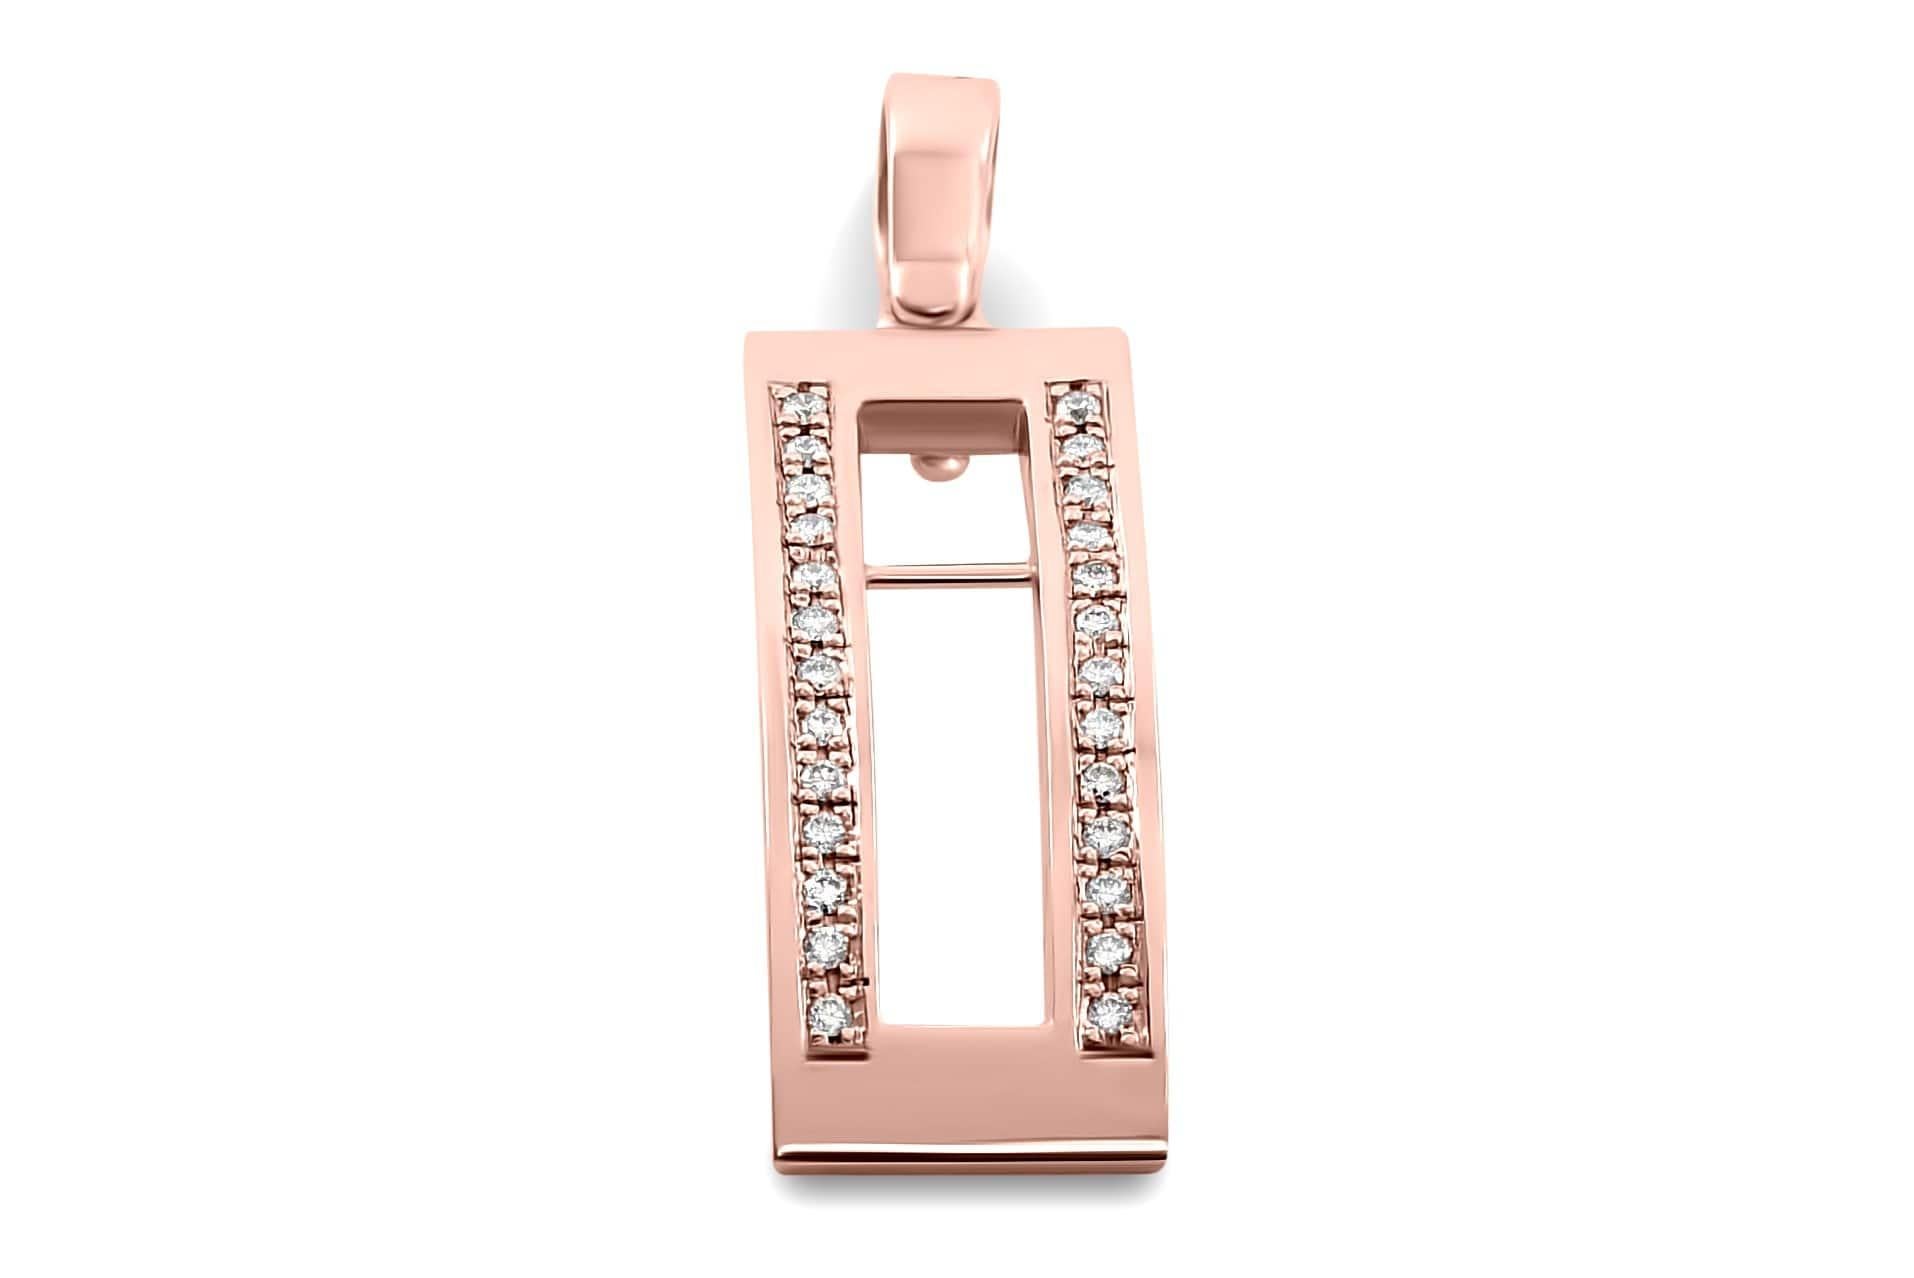 This stunning streamlined design pendant has been crafted with sleek elegance in mind. The solid 18k rose gold foundation is brought to life by two rows of the finest brilliant cut diamonds. The centre insert is engineered to securely clip in and